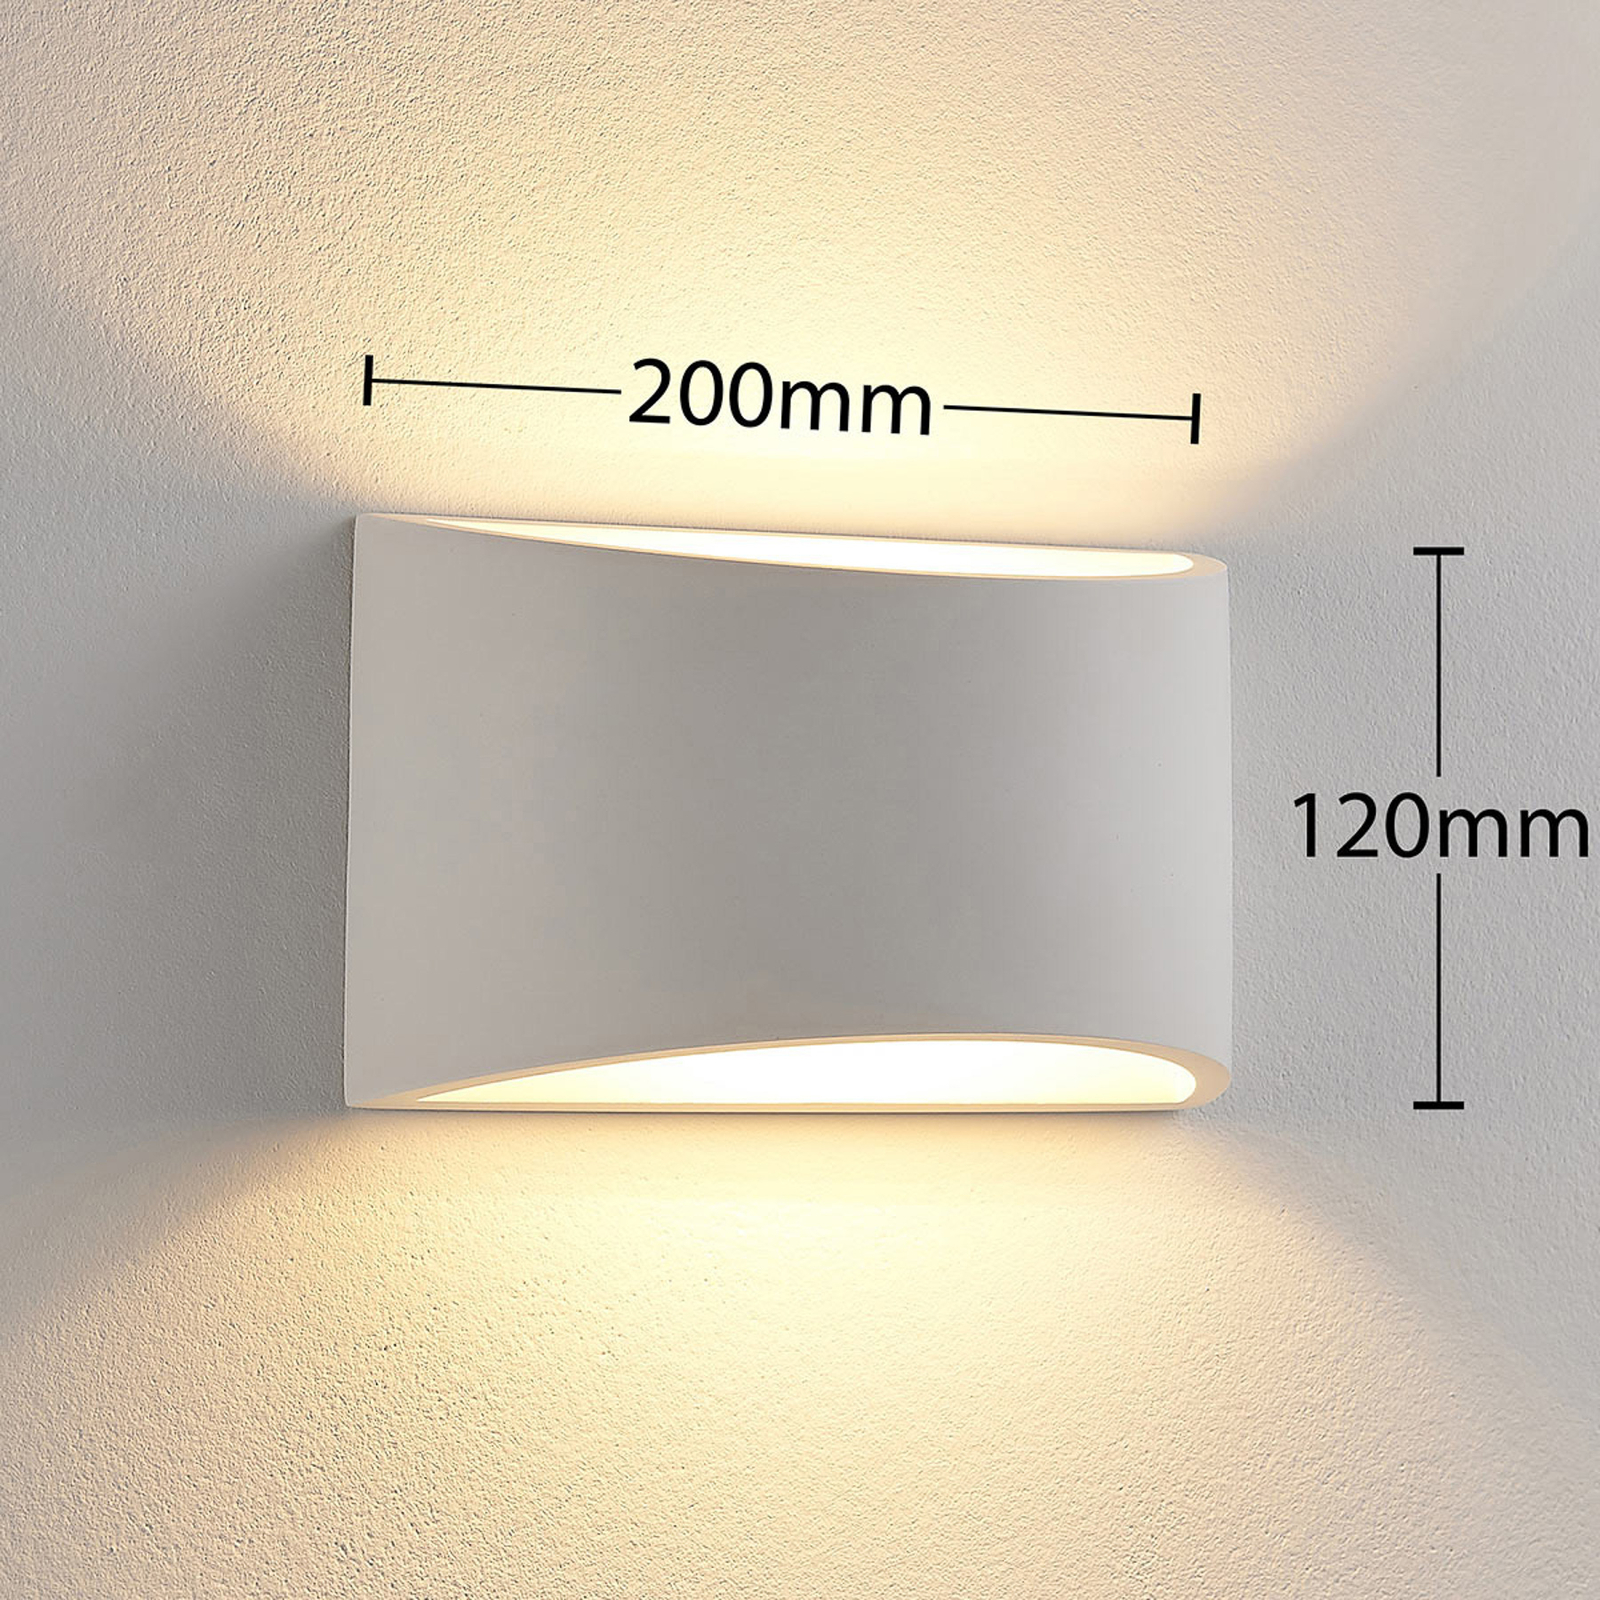 Lindby wall light Heiko, set of 2, up/down, plaster, white